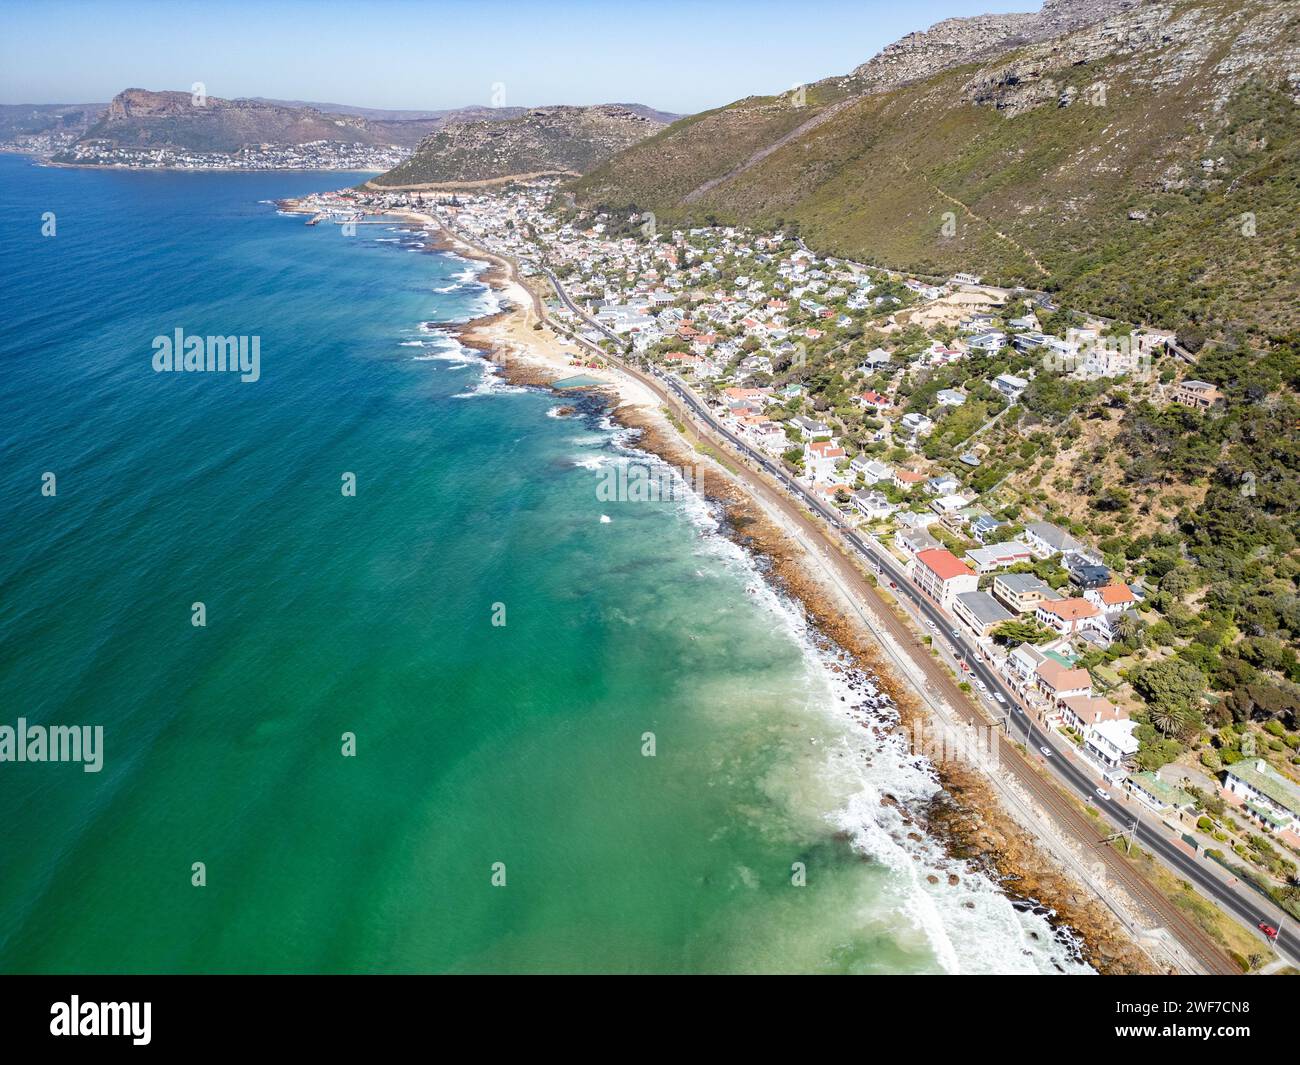 St James and Kalk Bay, Cape Town, South Africa Stock Photo